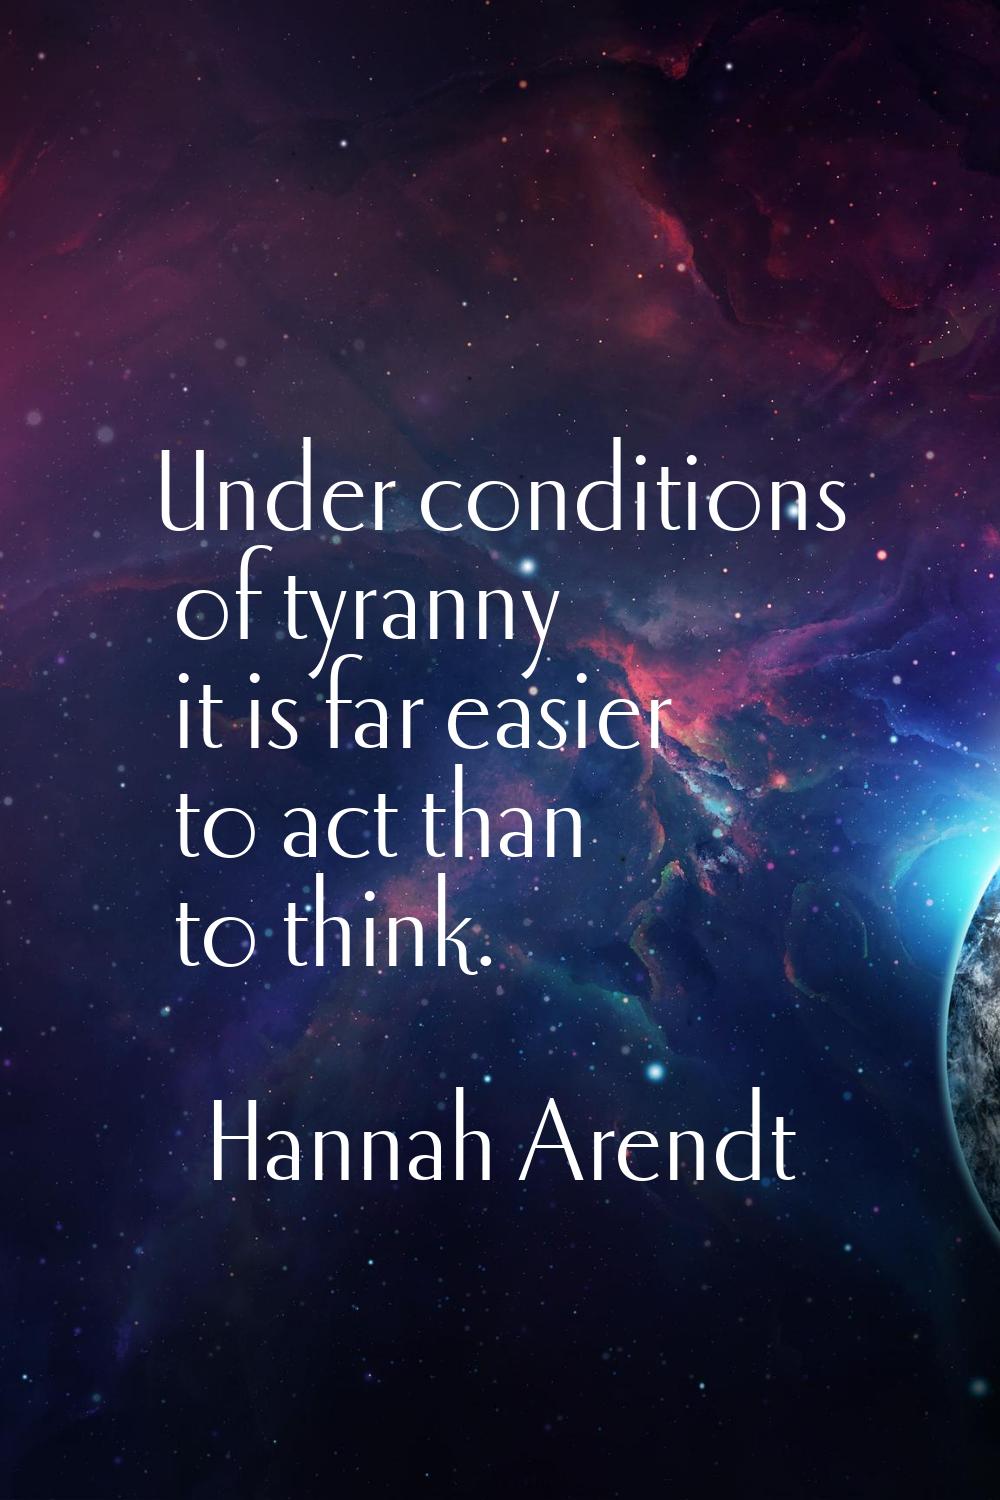 Under conditions of tyranny it is far easier to act than to think.